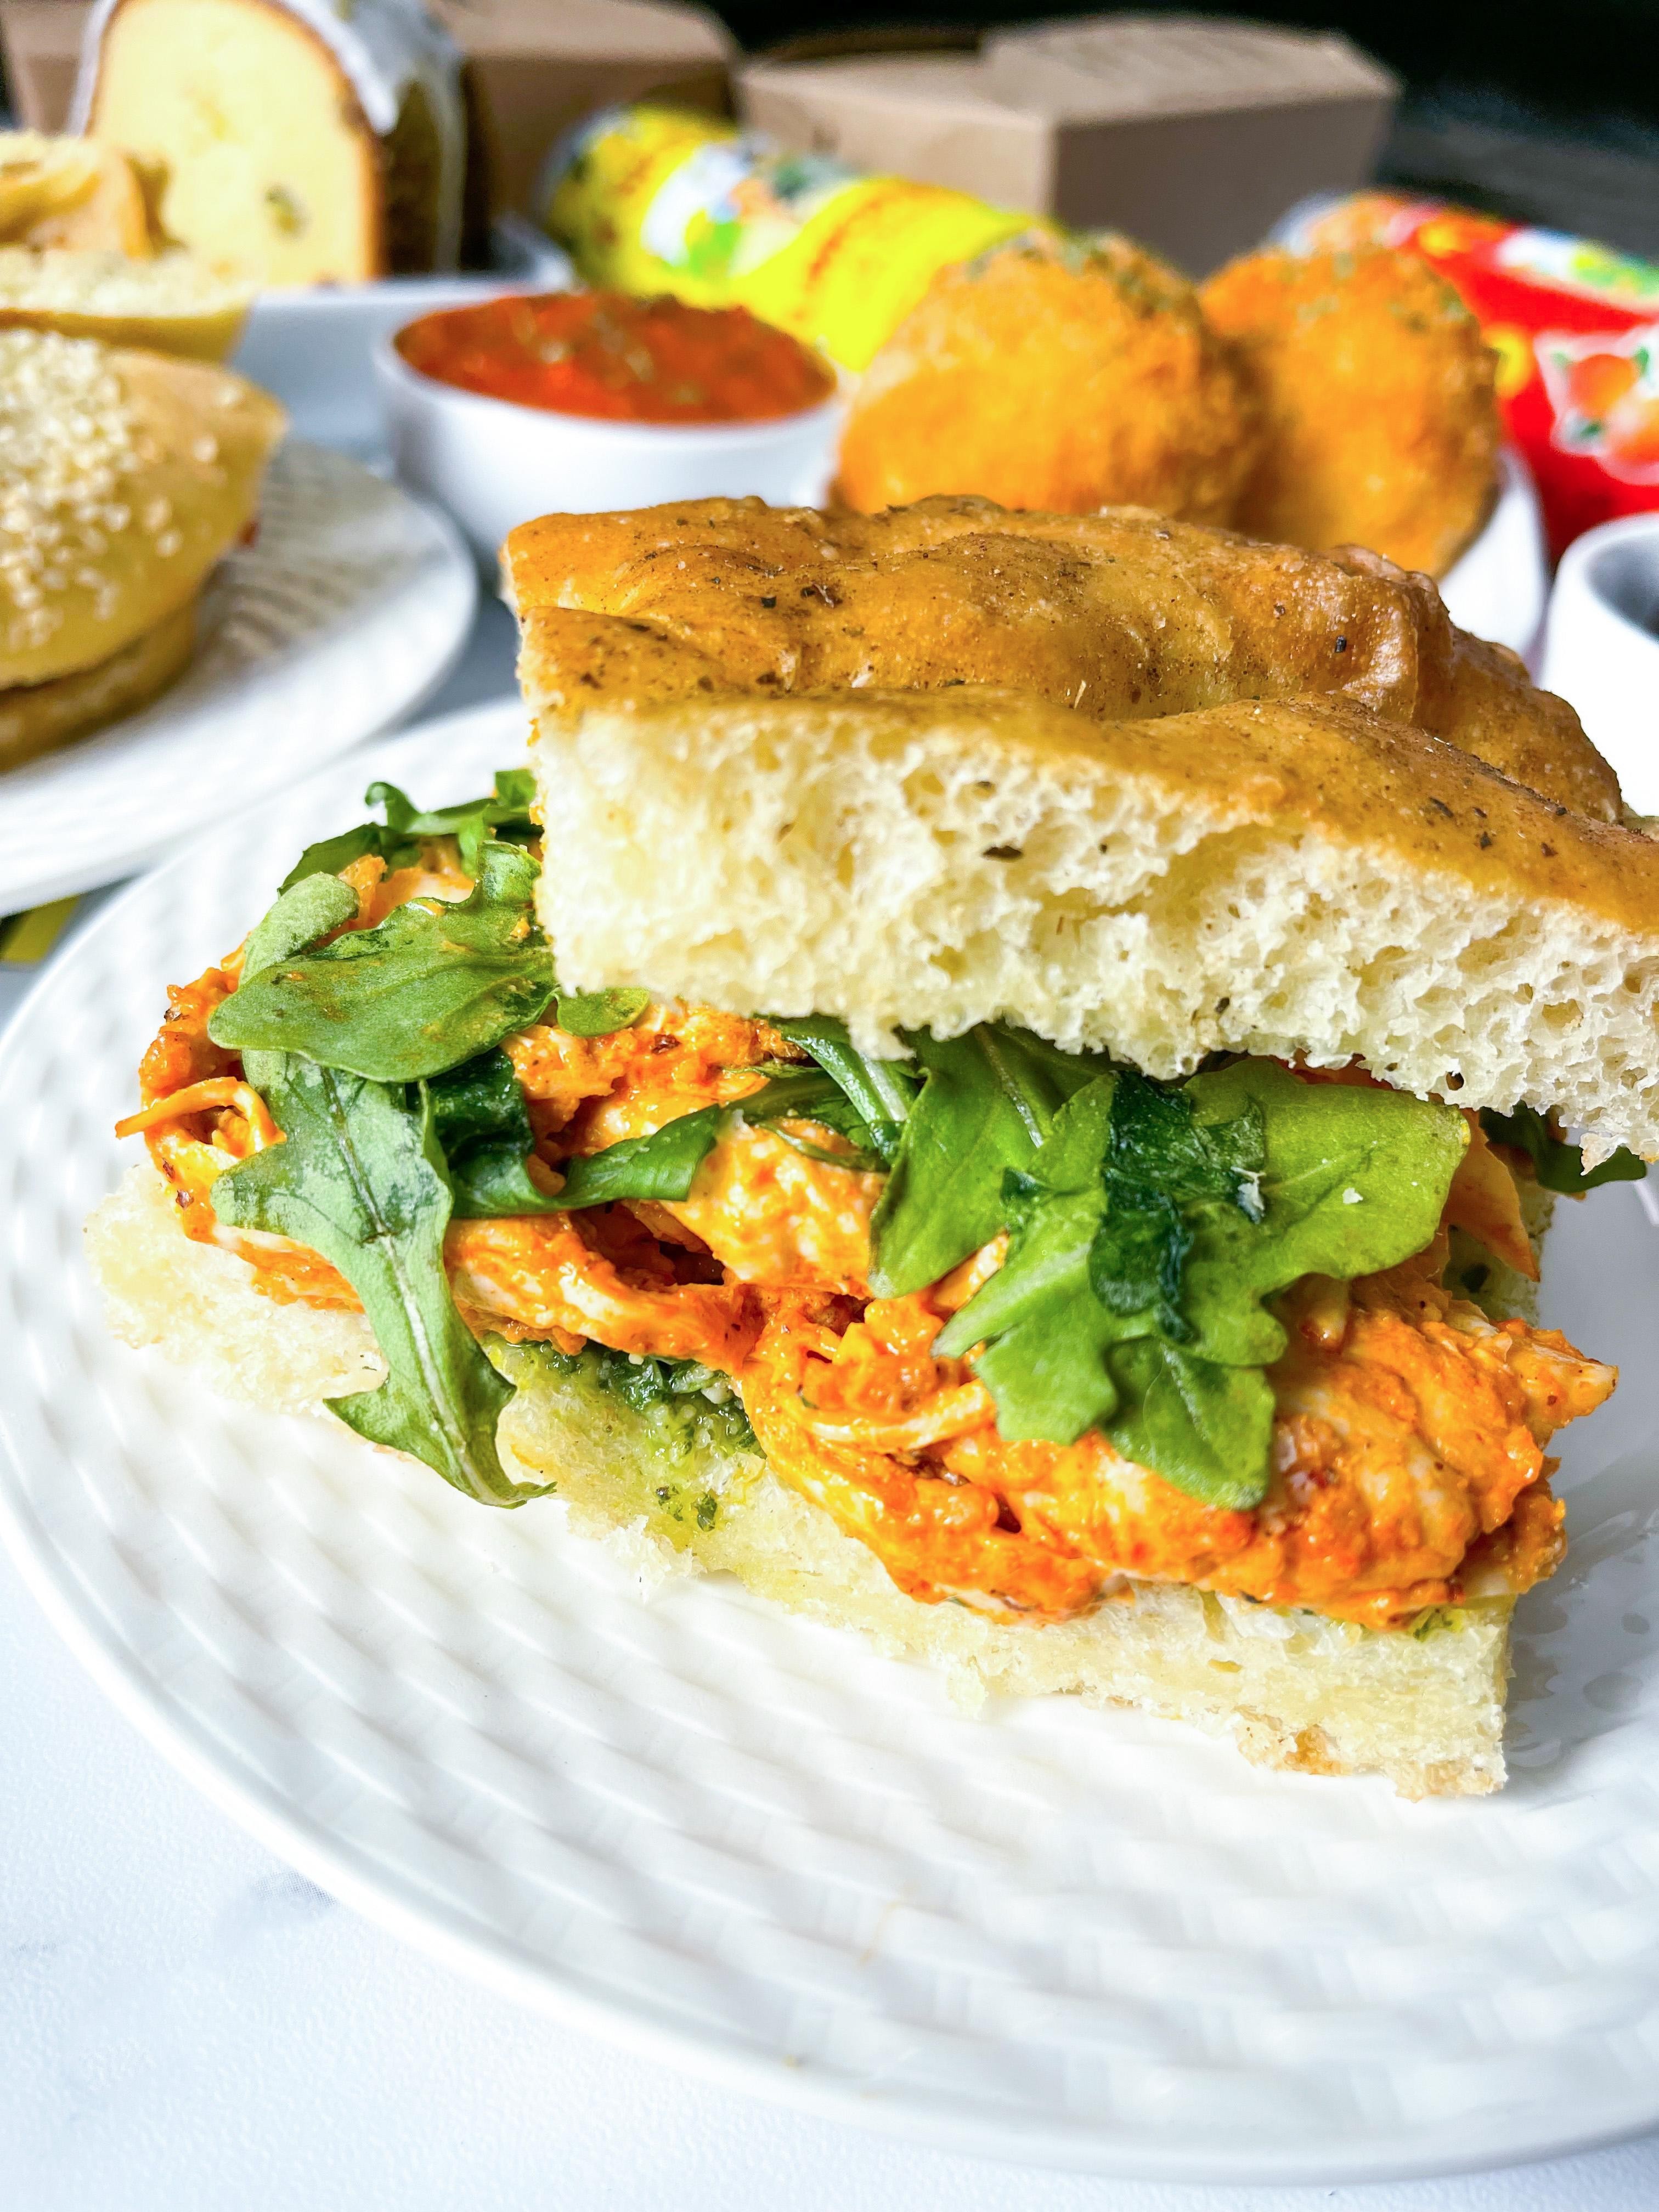 Roasted Chicken and Red Pepper Relish Sandwich